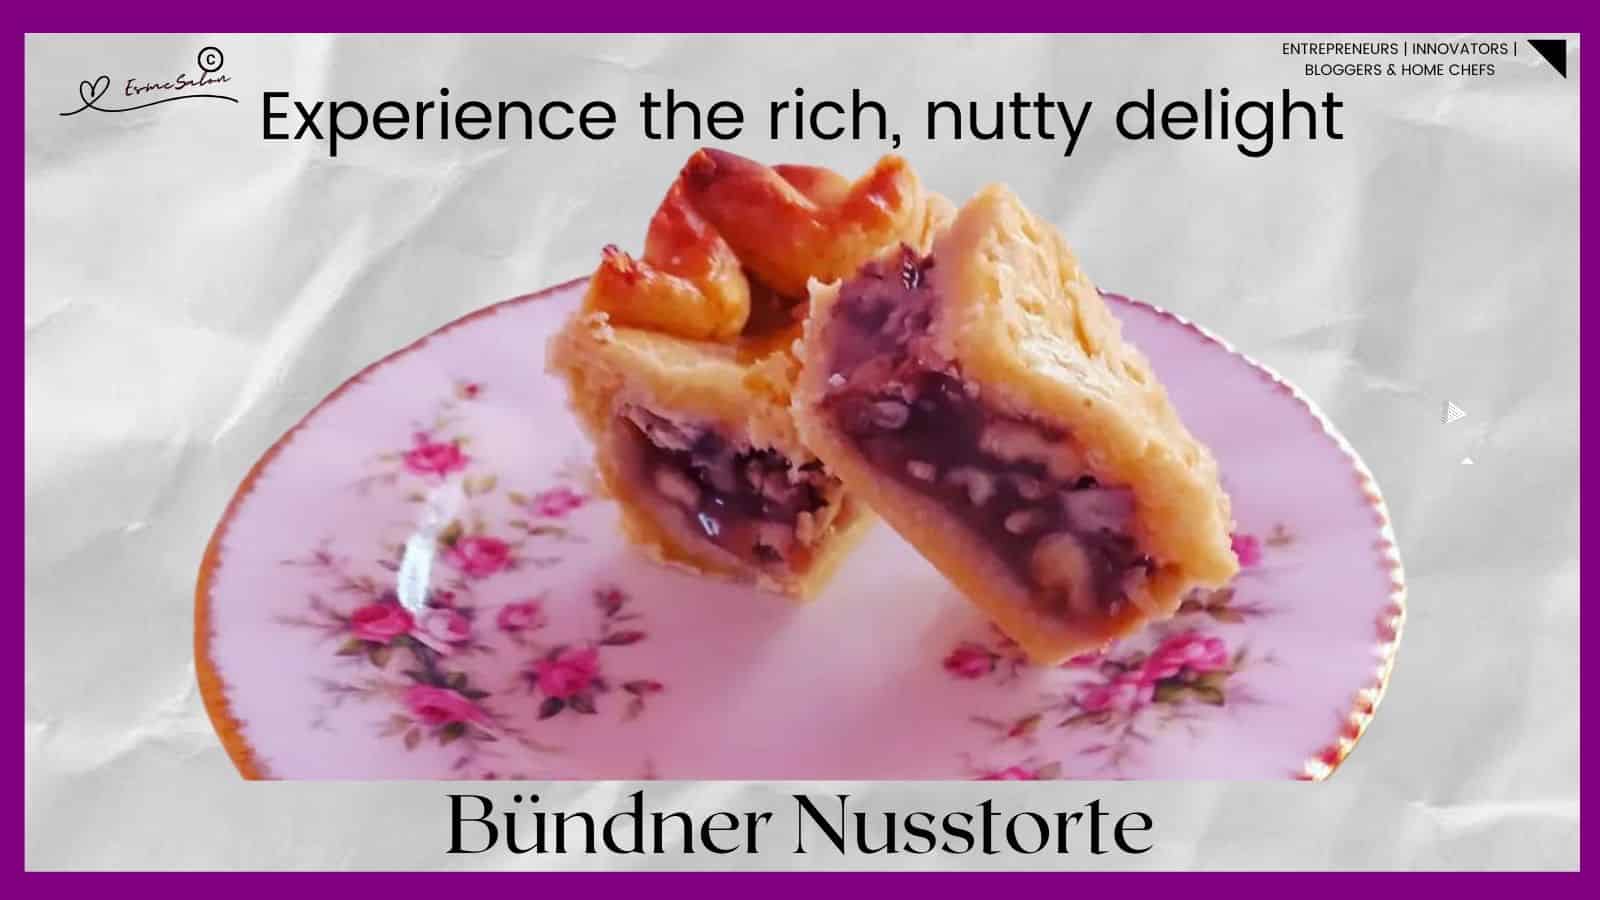 An image of a Swiss nut-filled pastry, Bündner Nusstorte served on a pretty side plate with pink flowers